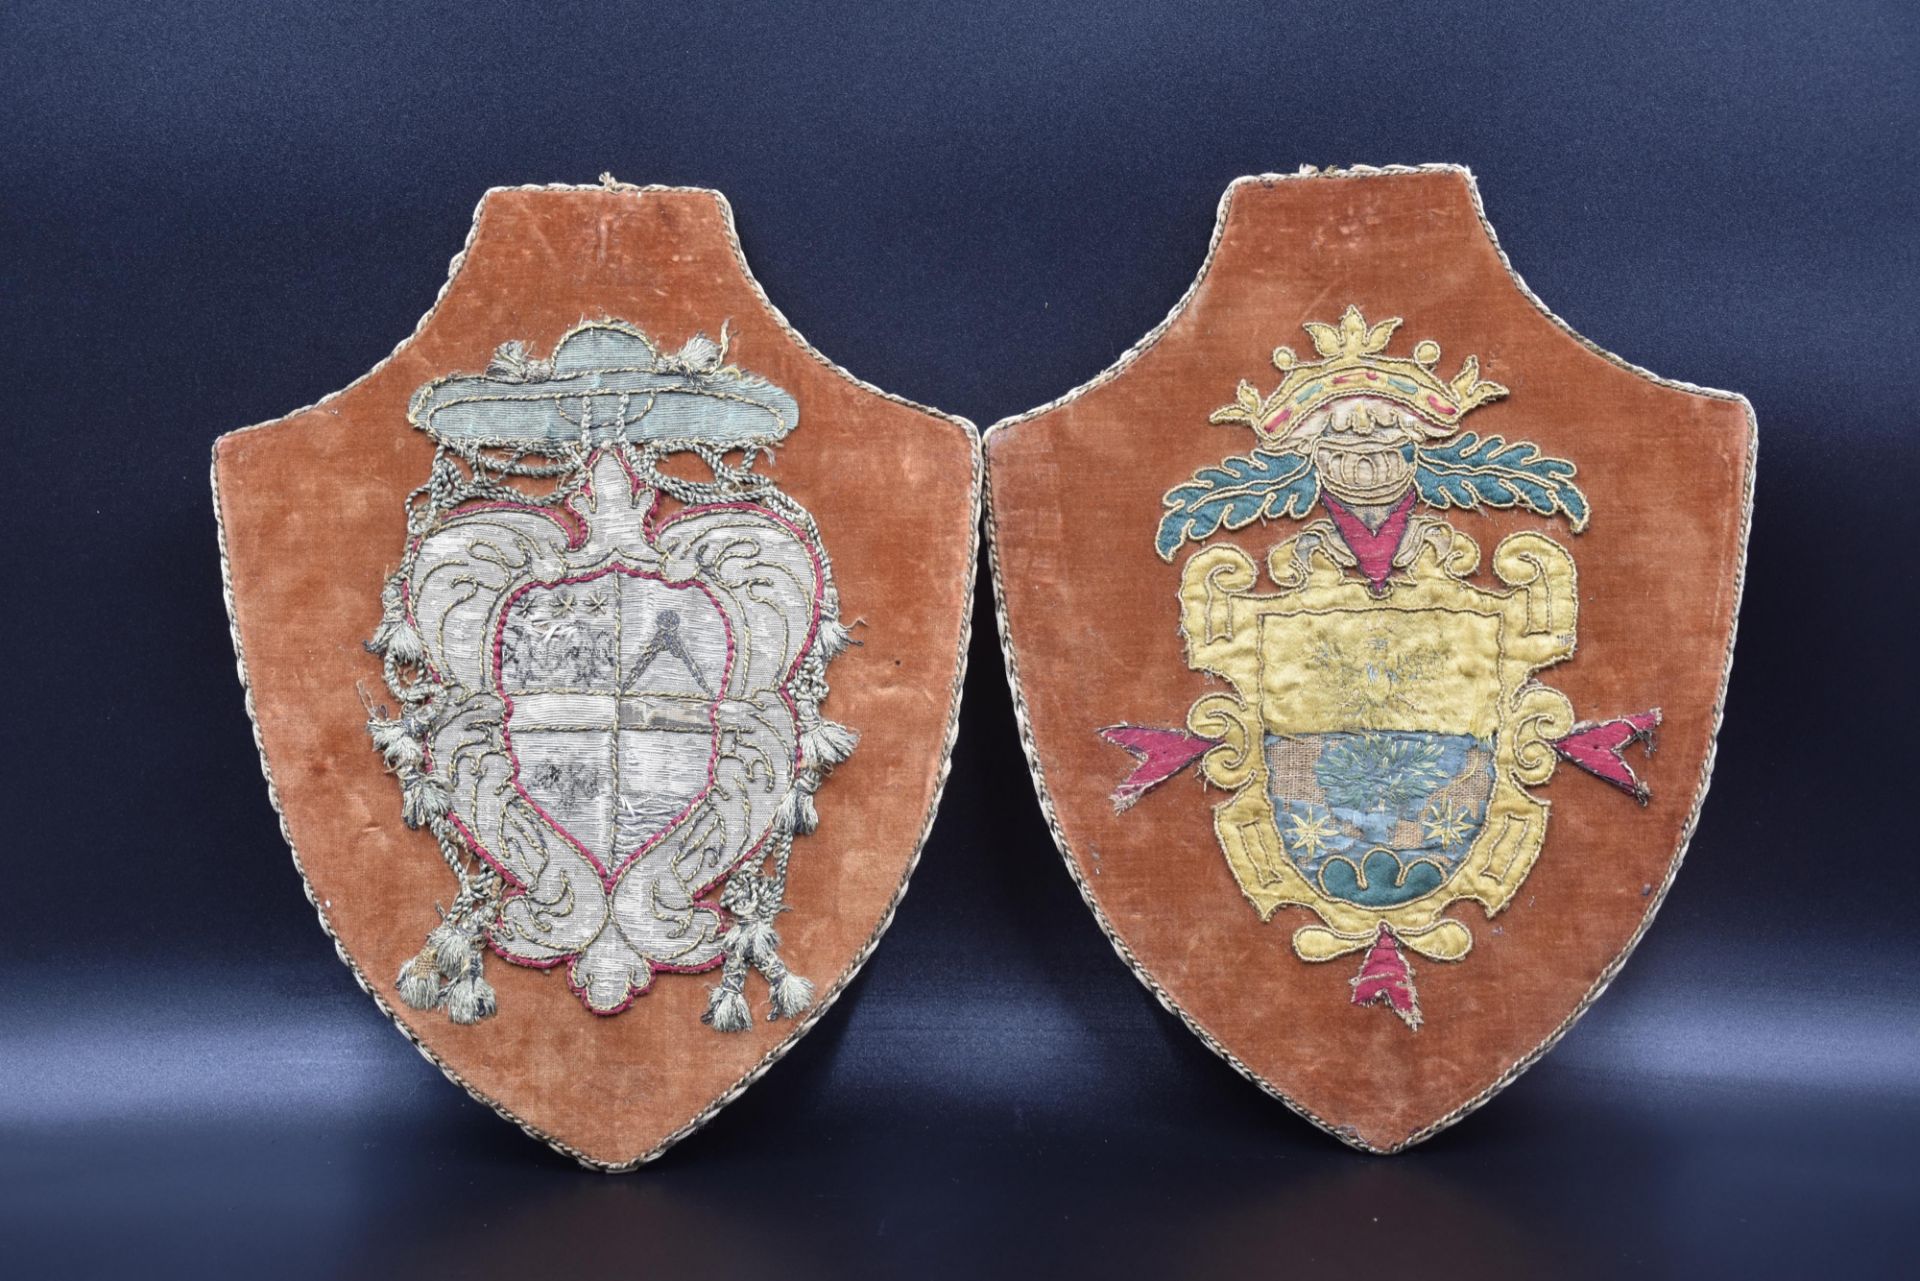 Coat of arms / heraldry : Pair of embroidered coats of arms XVIII th century. Ht panels: 19.